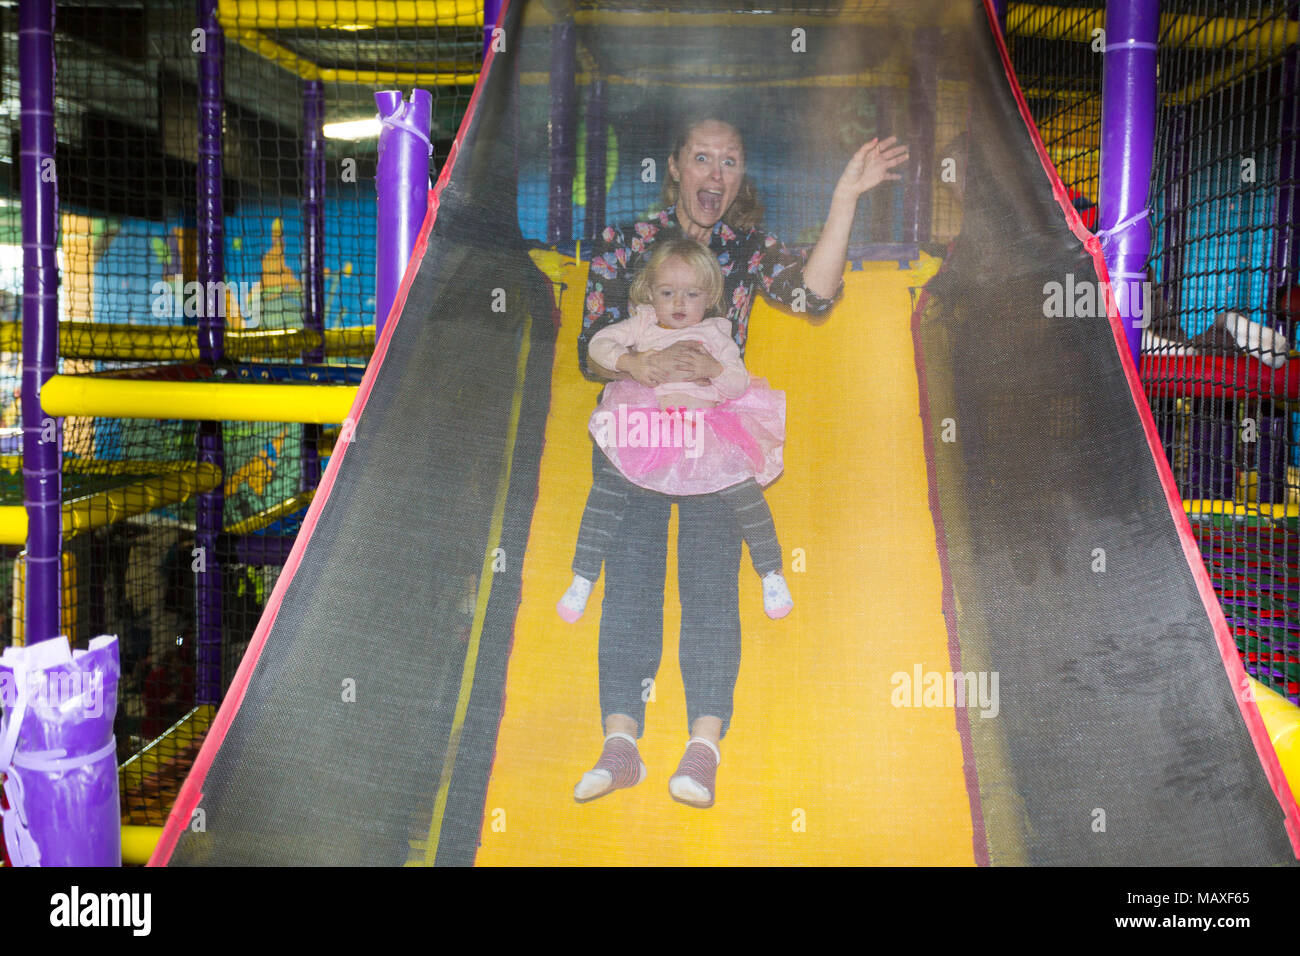 mother with child on slide at indoor playground, Ottawa, Ontario, Canada Stock Photo